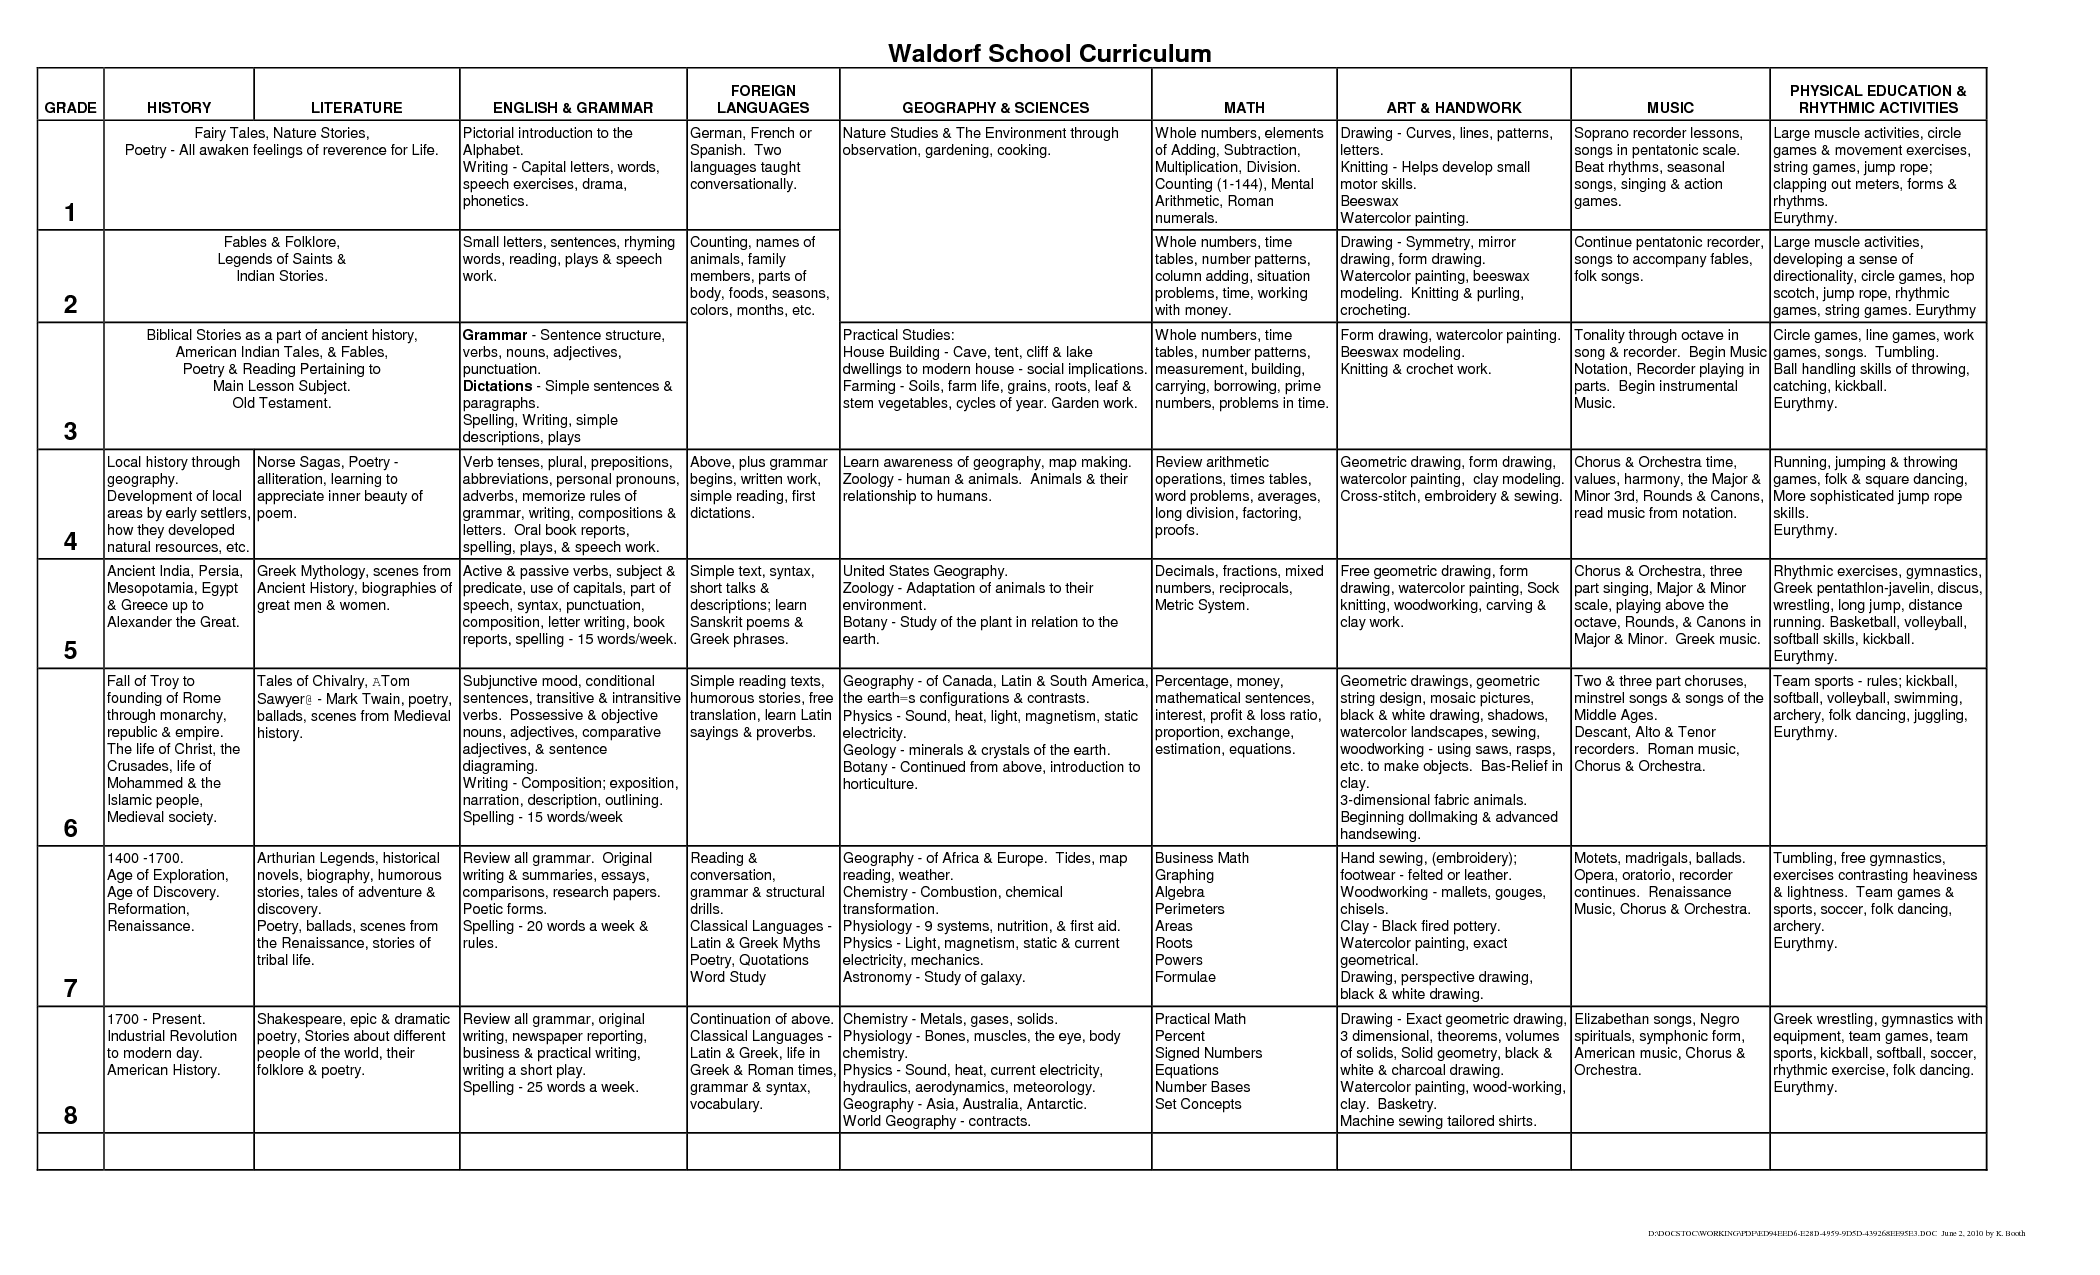 Physical Education Curriculum Map Elementary School Image